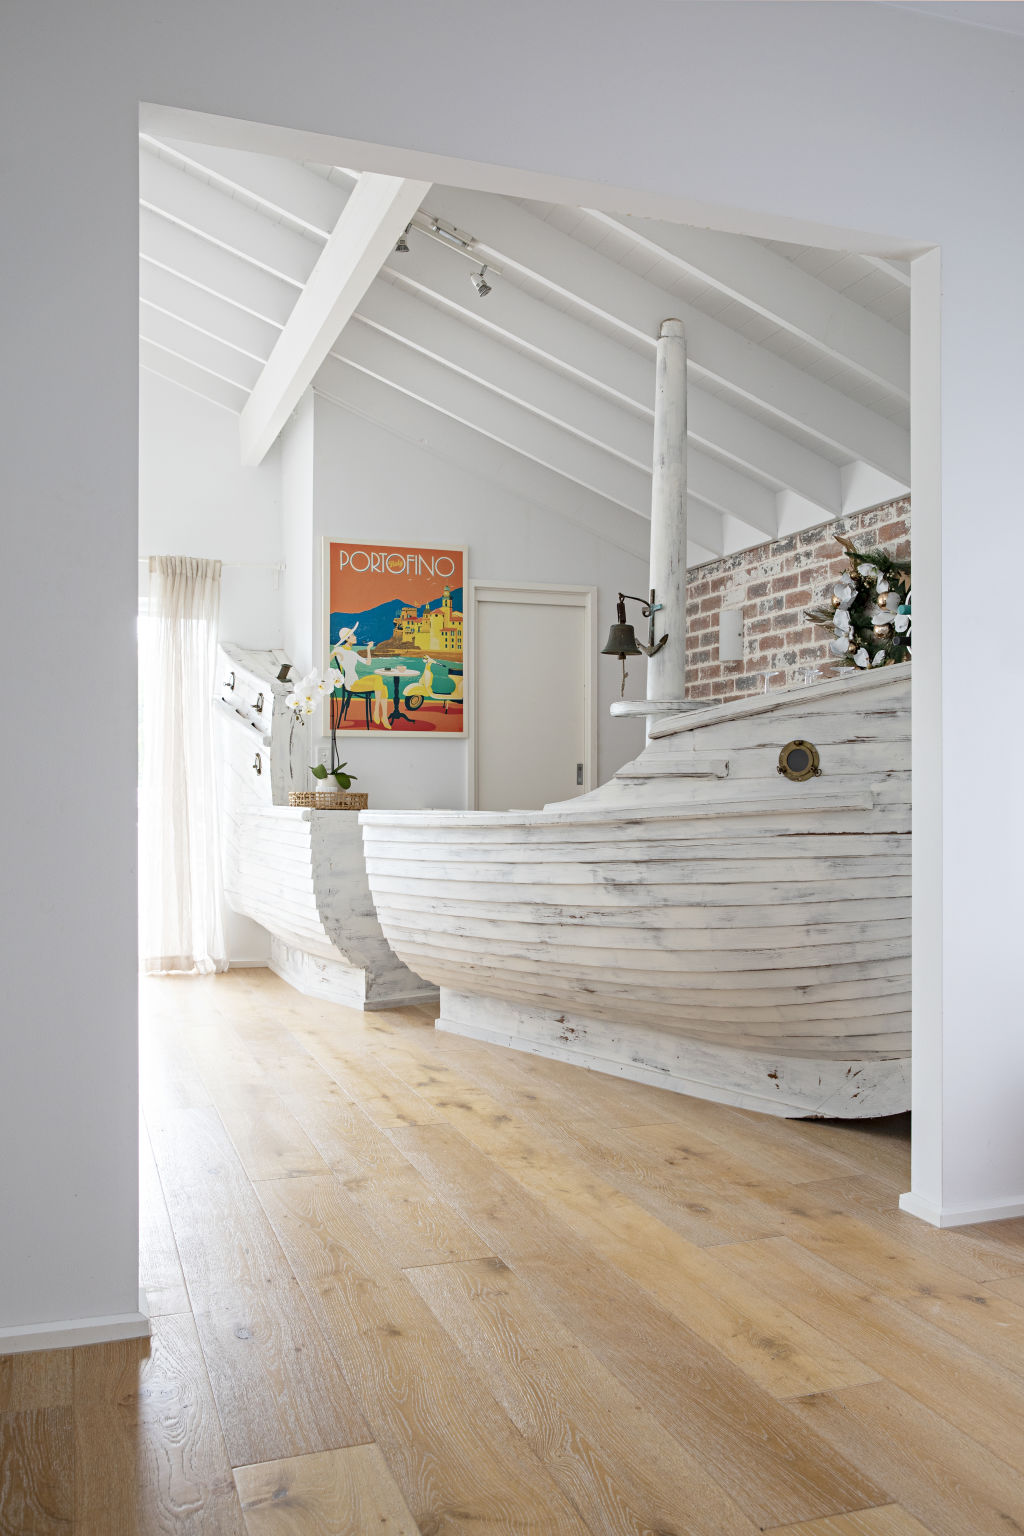 The home's previous owner installed a large wooden boat in the living room, and it's since been repurposed into a bar. Photo: Natalie Jeffcott